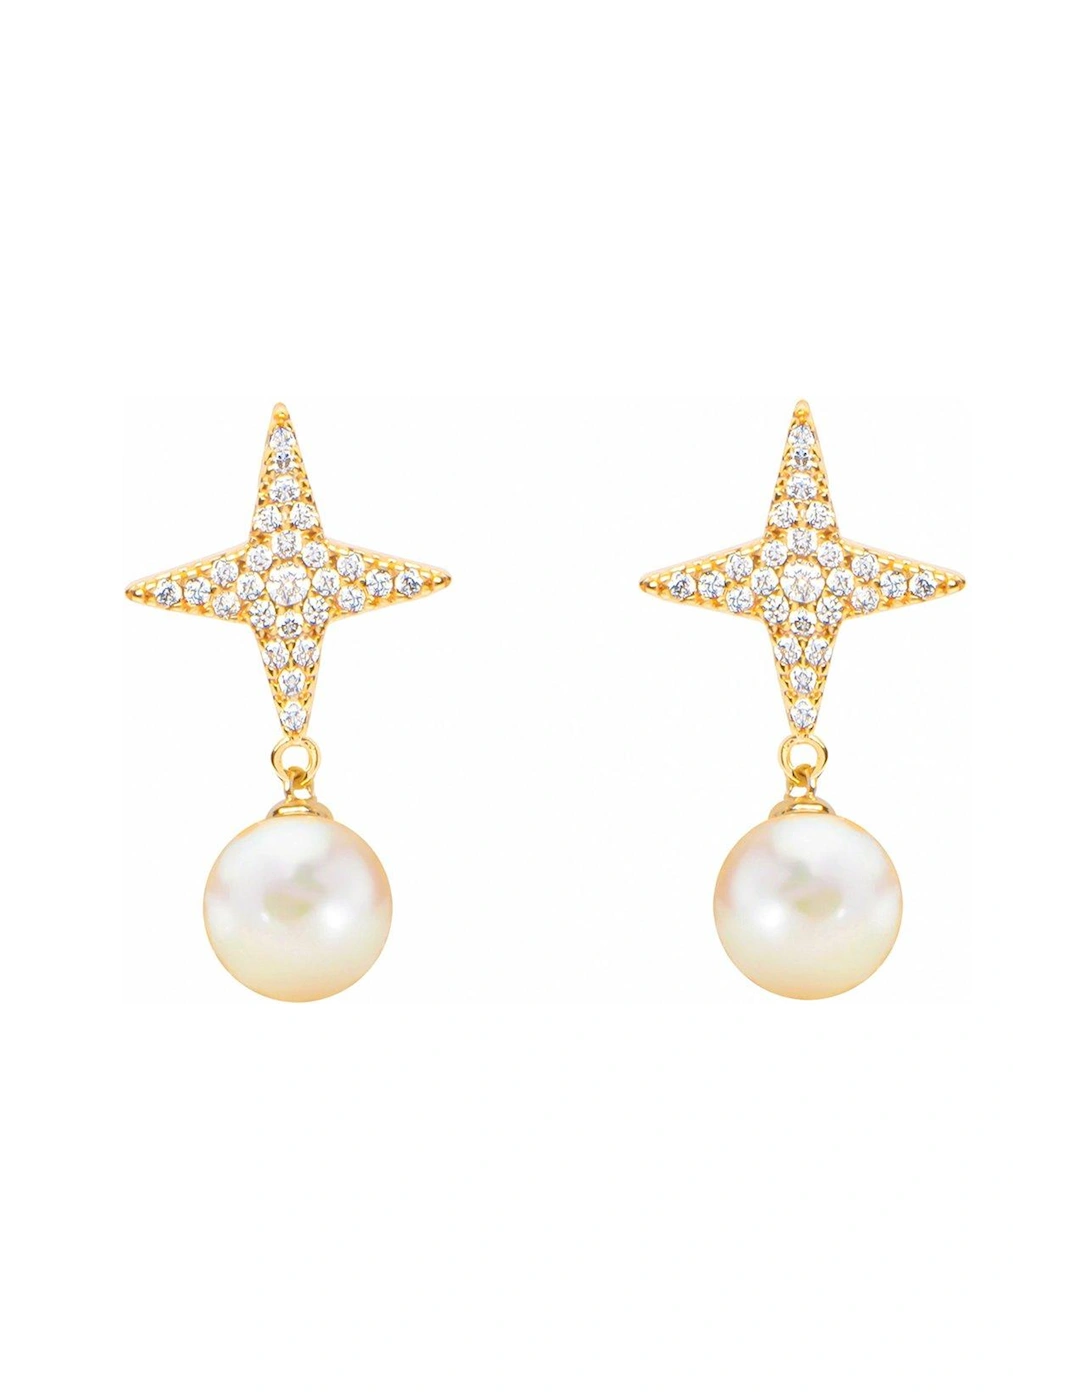 18ct Gold Plated Sterling Silver Star CZ Pearl Drop Earrings, 2 of 1